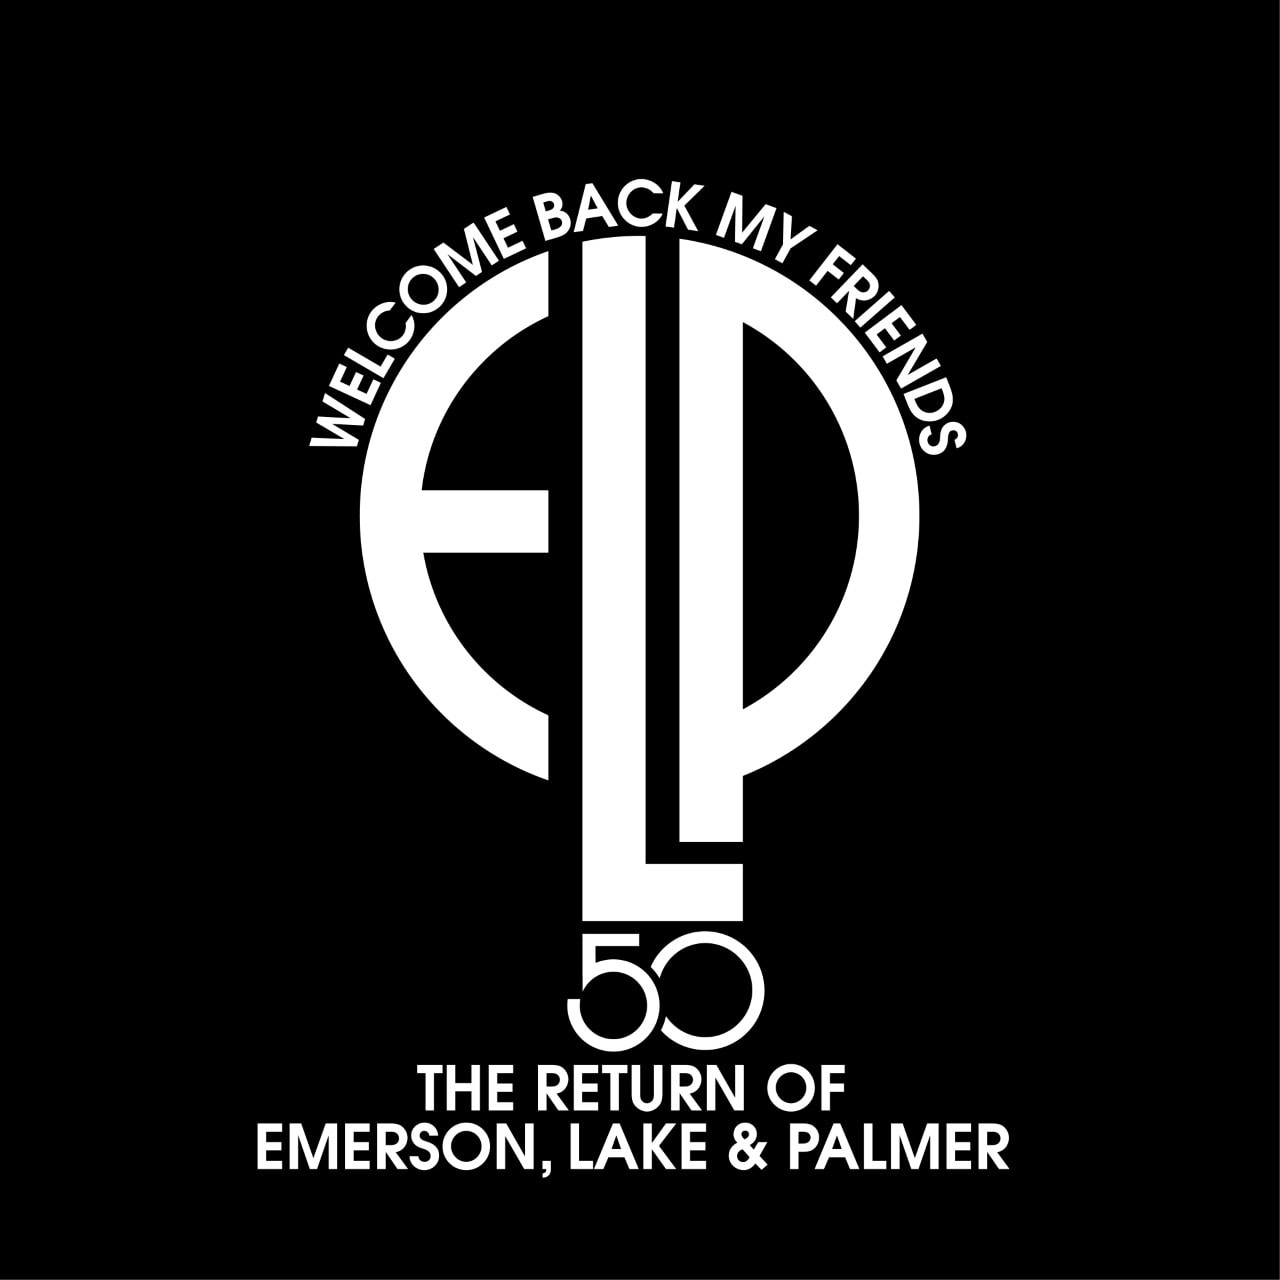 Welcome Back My Friends: The Return of Emerson Lake & Palmer